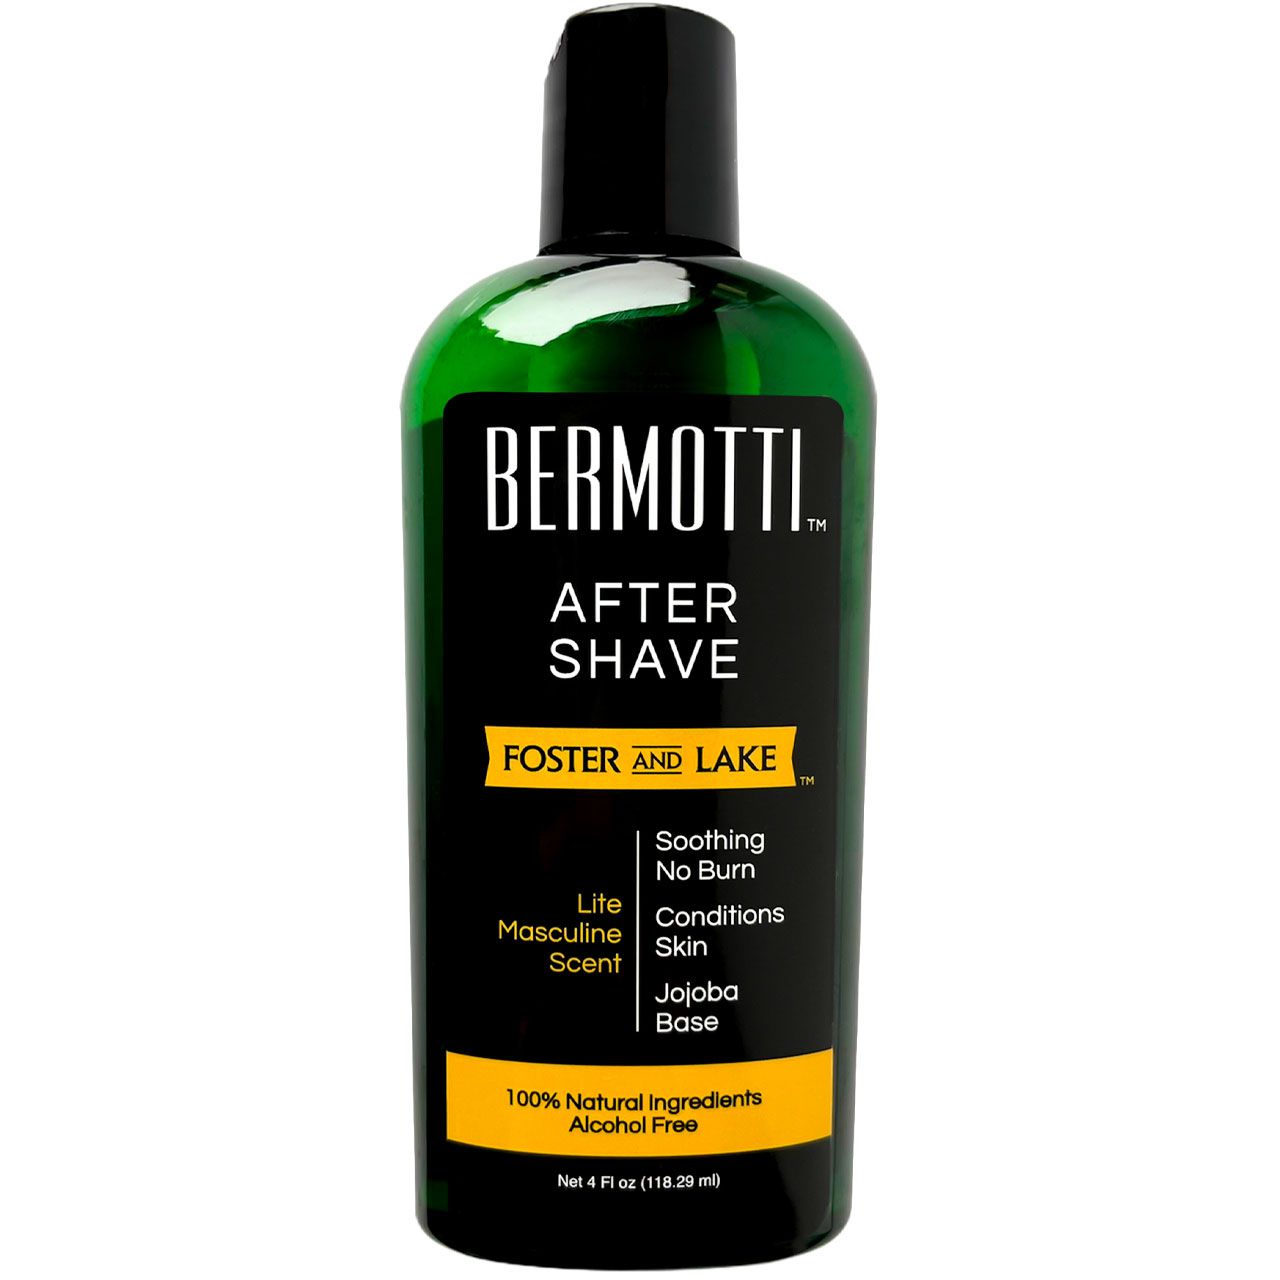 Bermotti After Shave